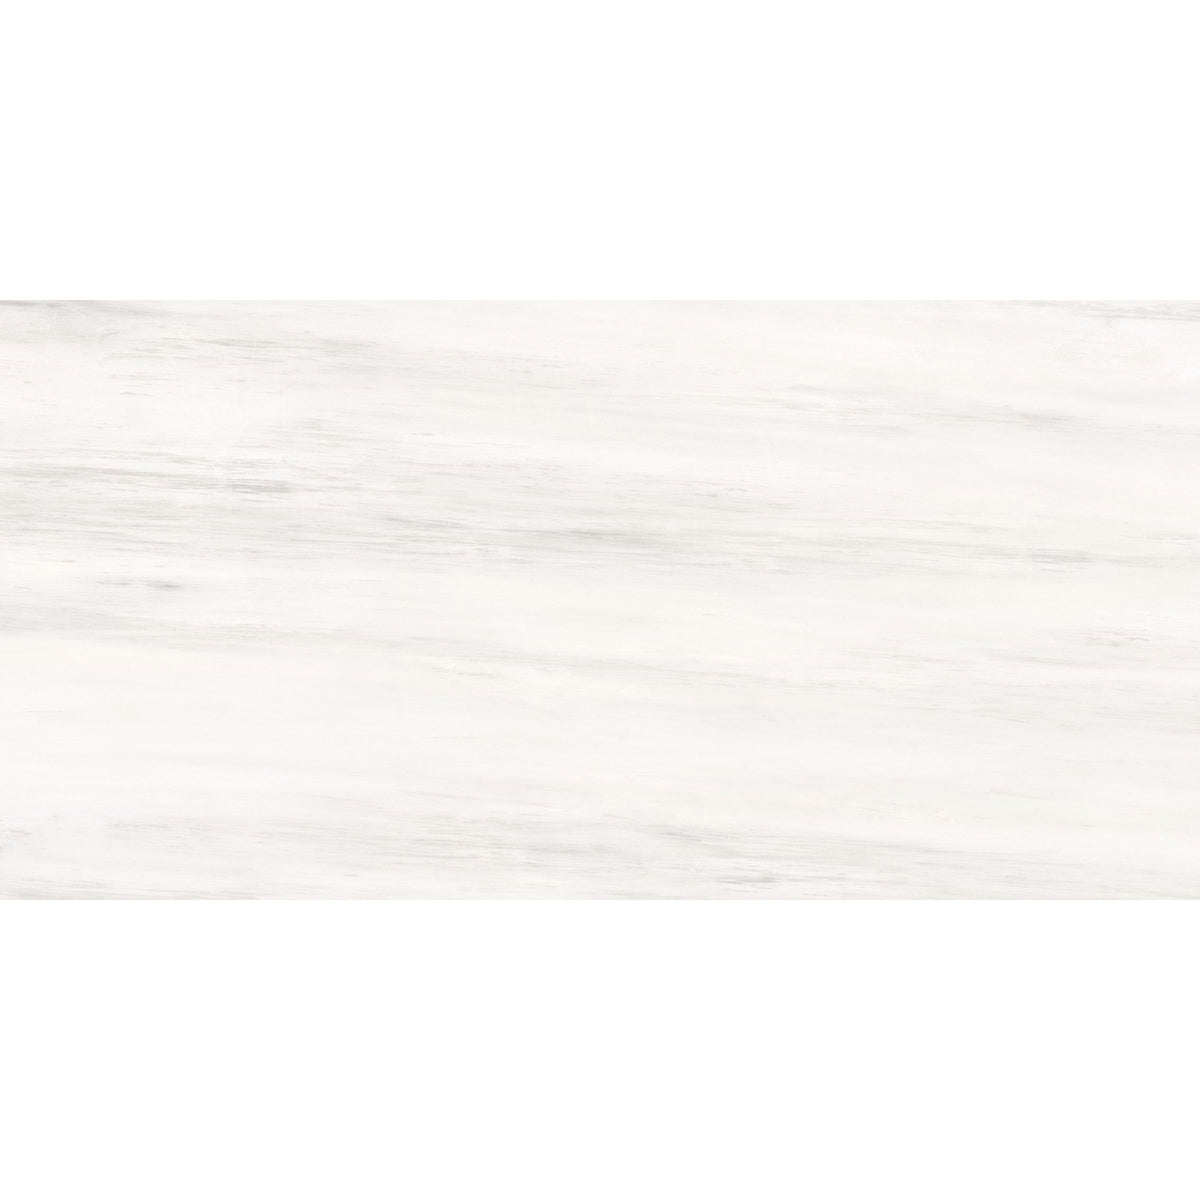 Anatolia Mayfair 16 in. x 32 in. HD Rectified Porcelain Tile - Suave Bianco (Matte)